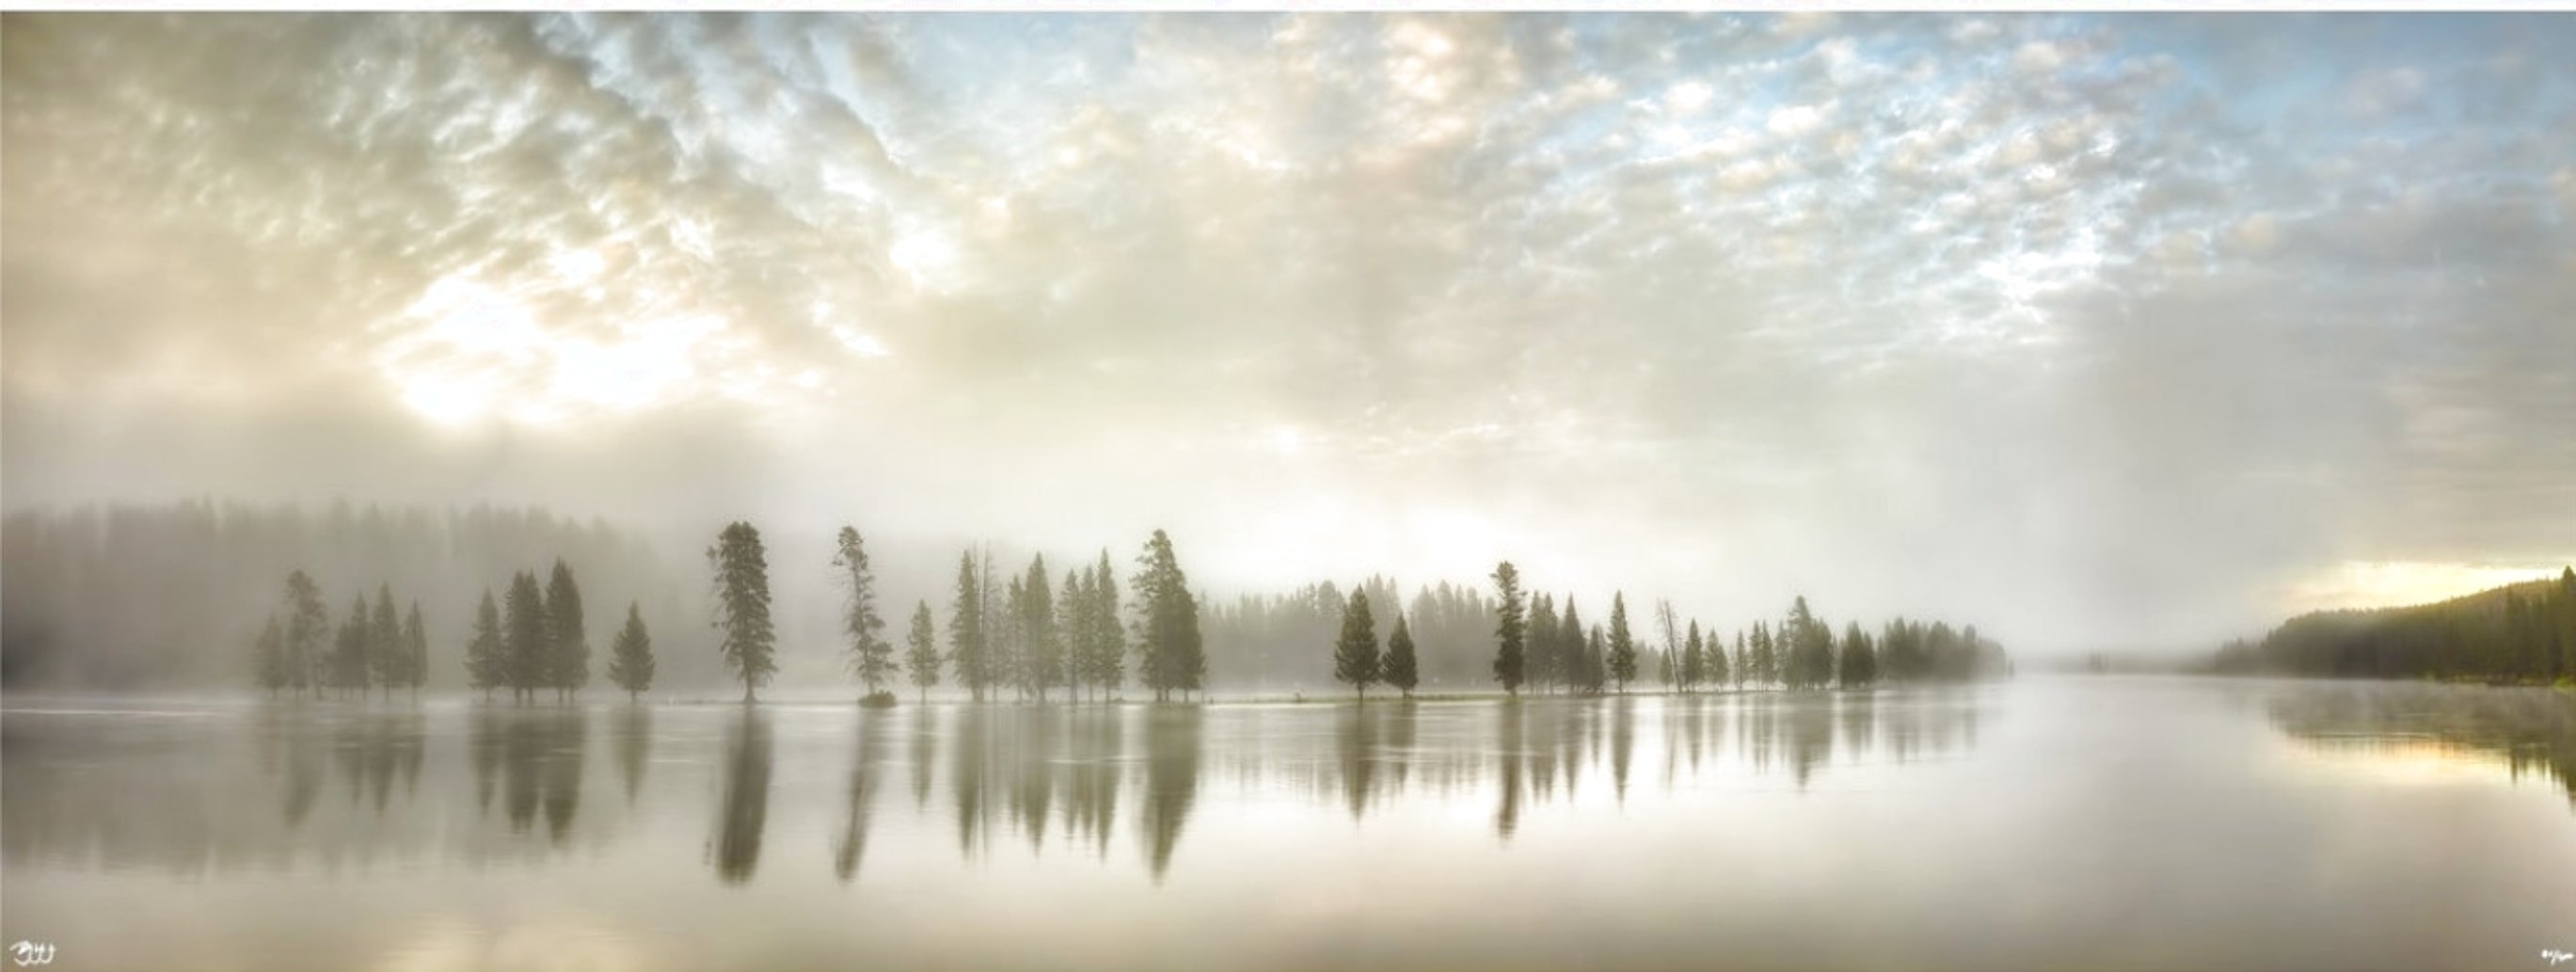 River of Silence, Yellowstone National Park  Wyoming, USA Panorama by Rodney Lough, Jr. 